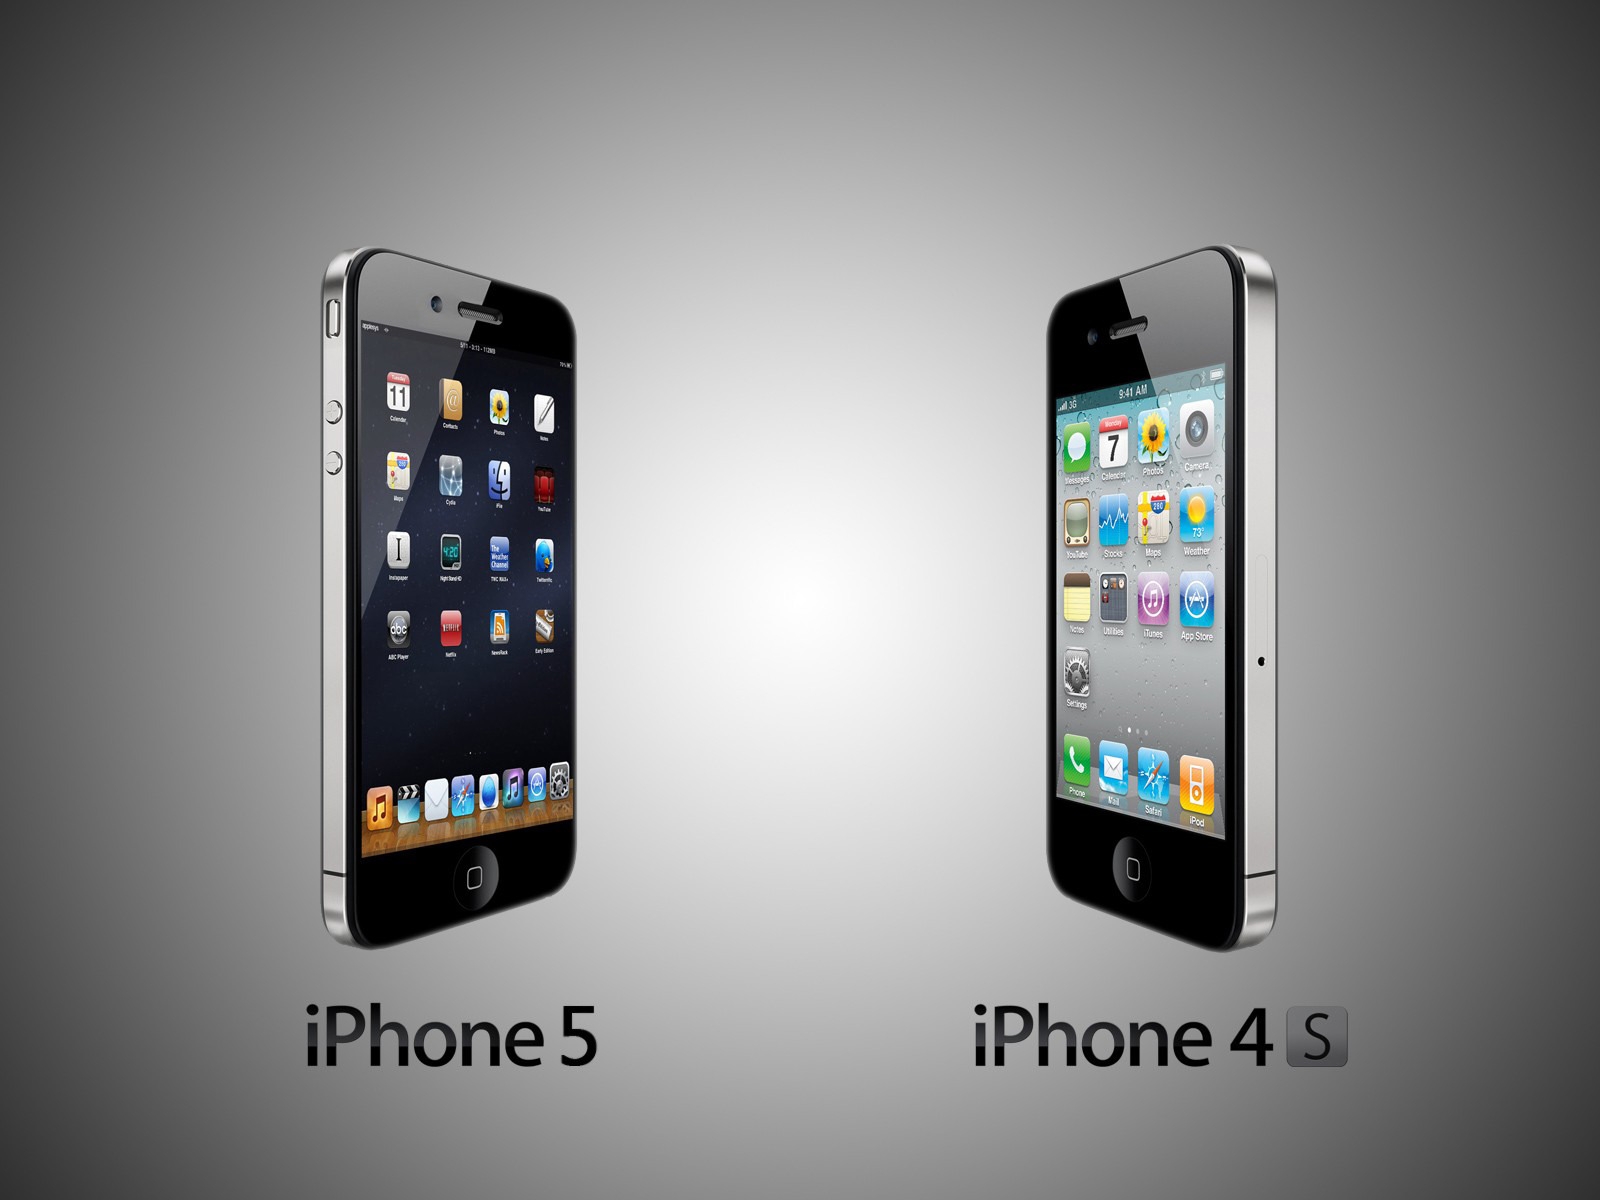 iPhone 4S and iPhone 5 for 1600 x 1200 resolution